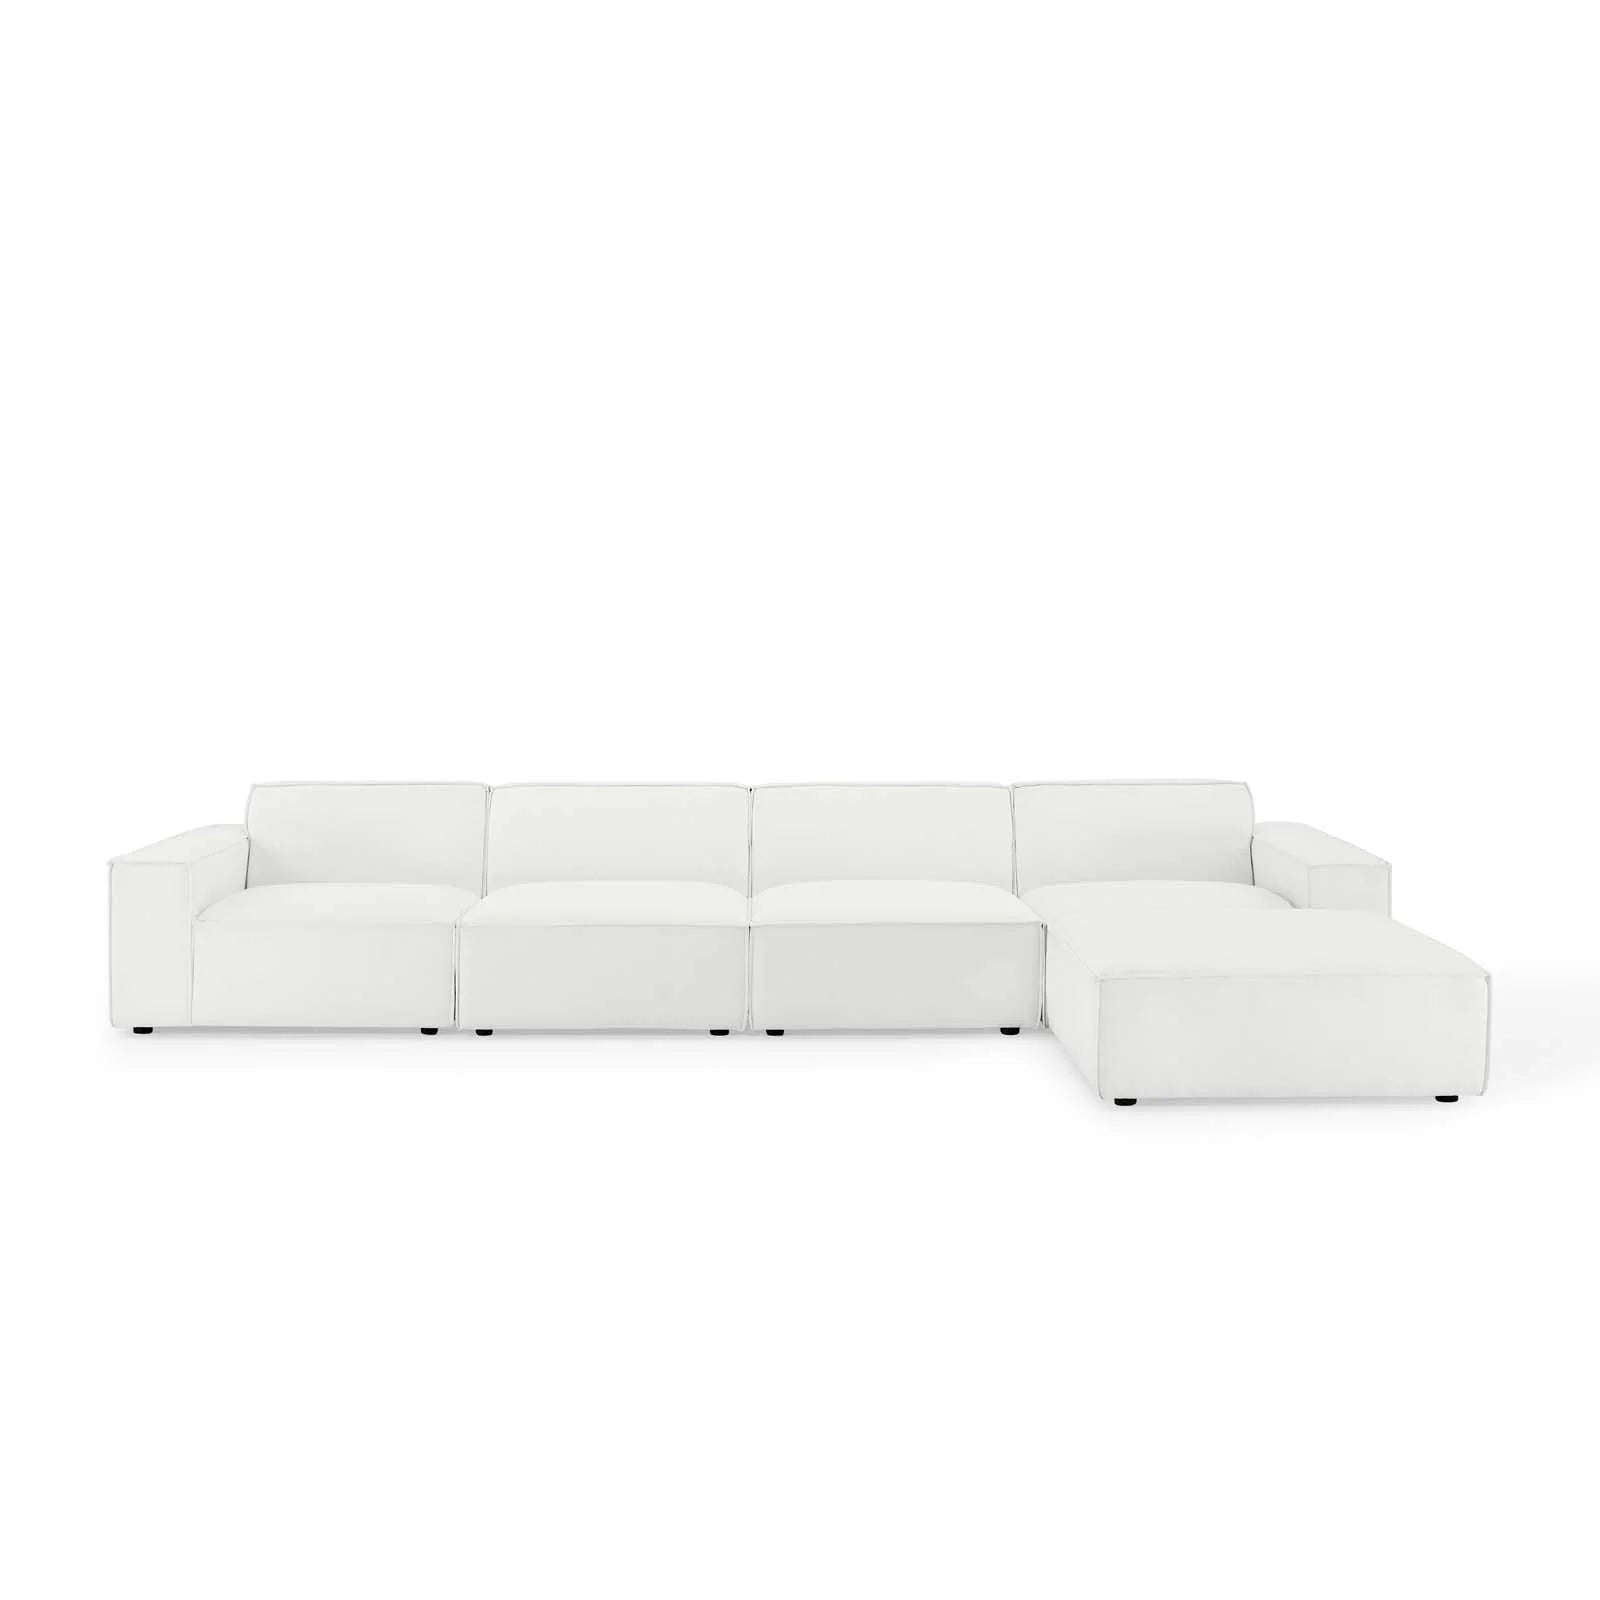 BREEZE 5 PIECE EXTENDED SECTIONAL - WHITE